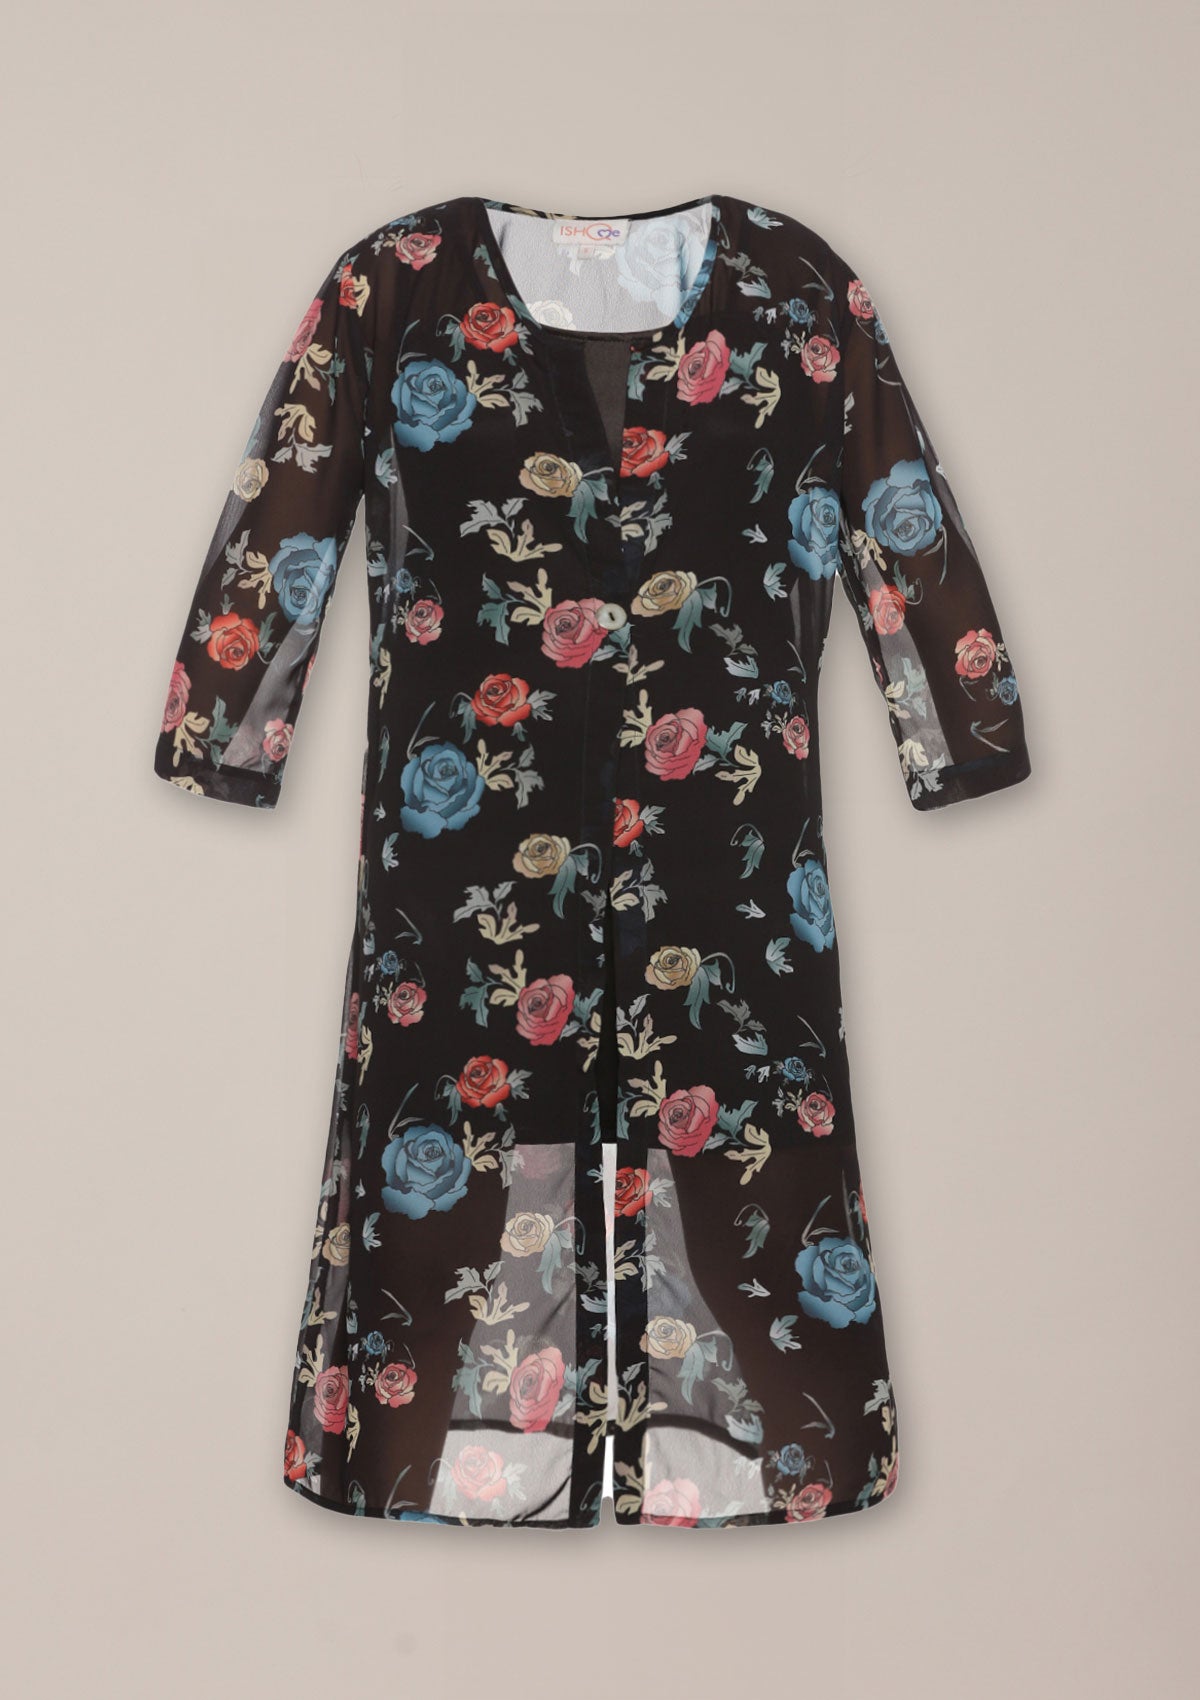 Black Rose - Floral Printed Two Piece Party Dress